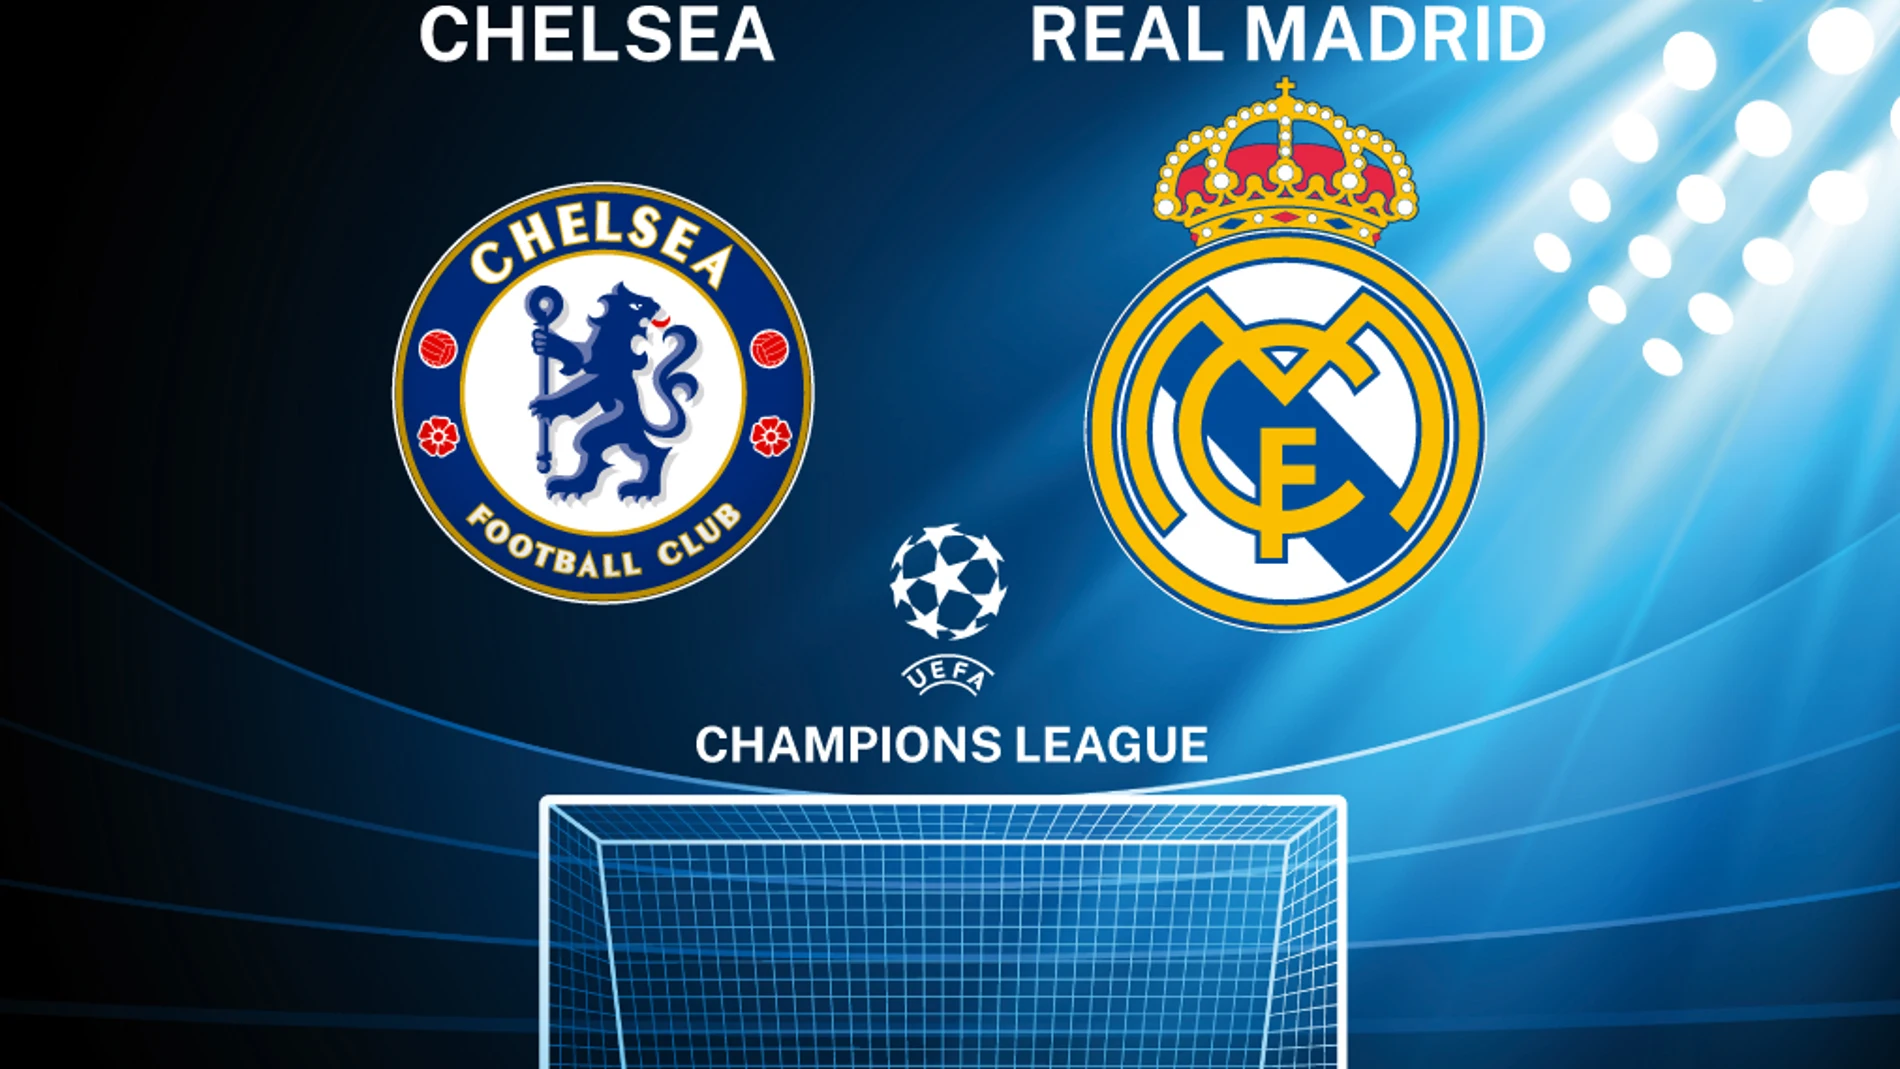 Chelsea-Real Madrid Champions League